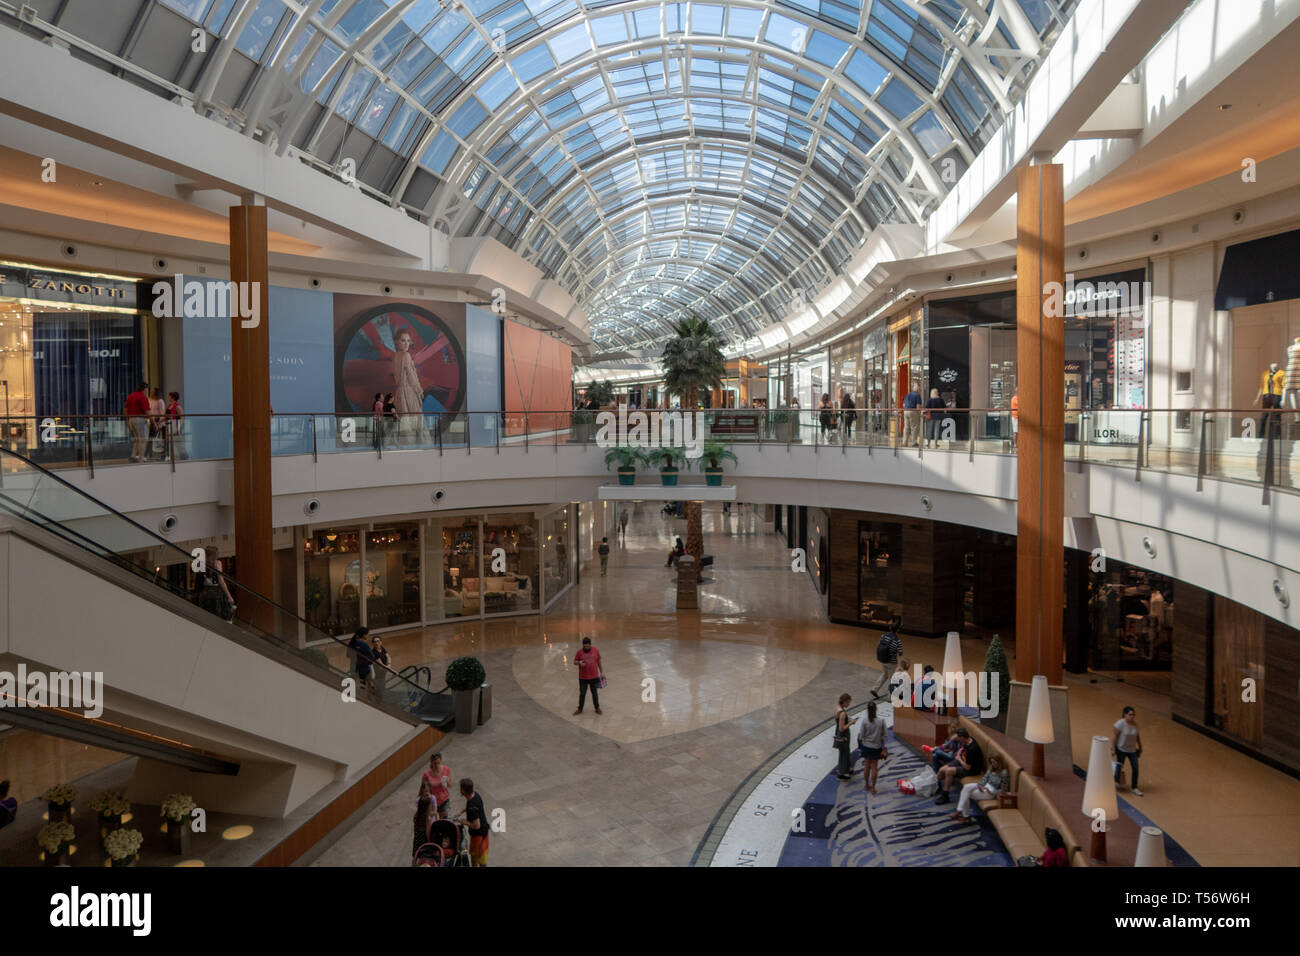 Orlando Florida,The Mall at Millenia,shopping shopper shoppers shop shops  market markets marketplace buying selling,retail store stores business  busin Stock Photo - Alamy